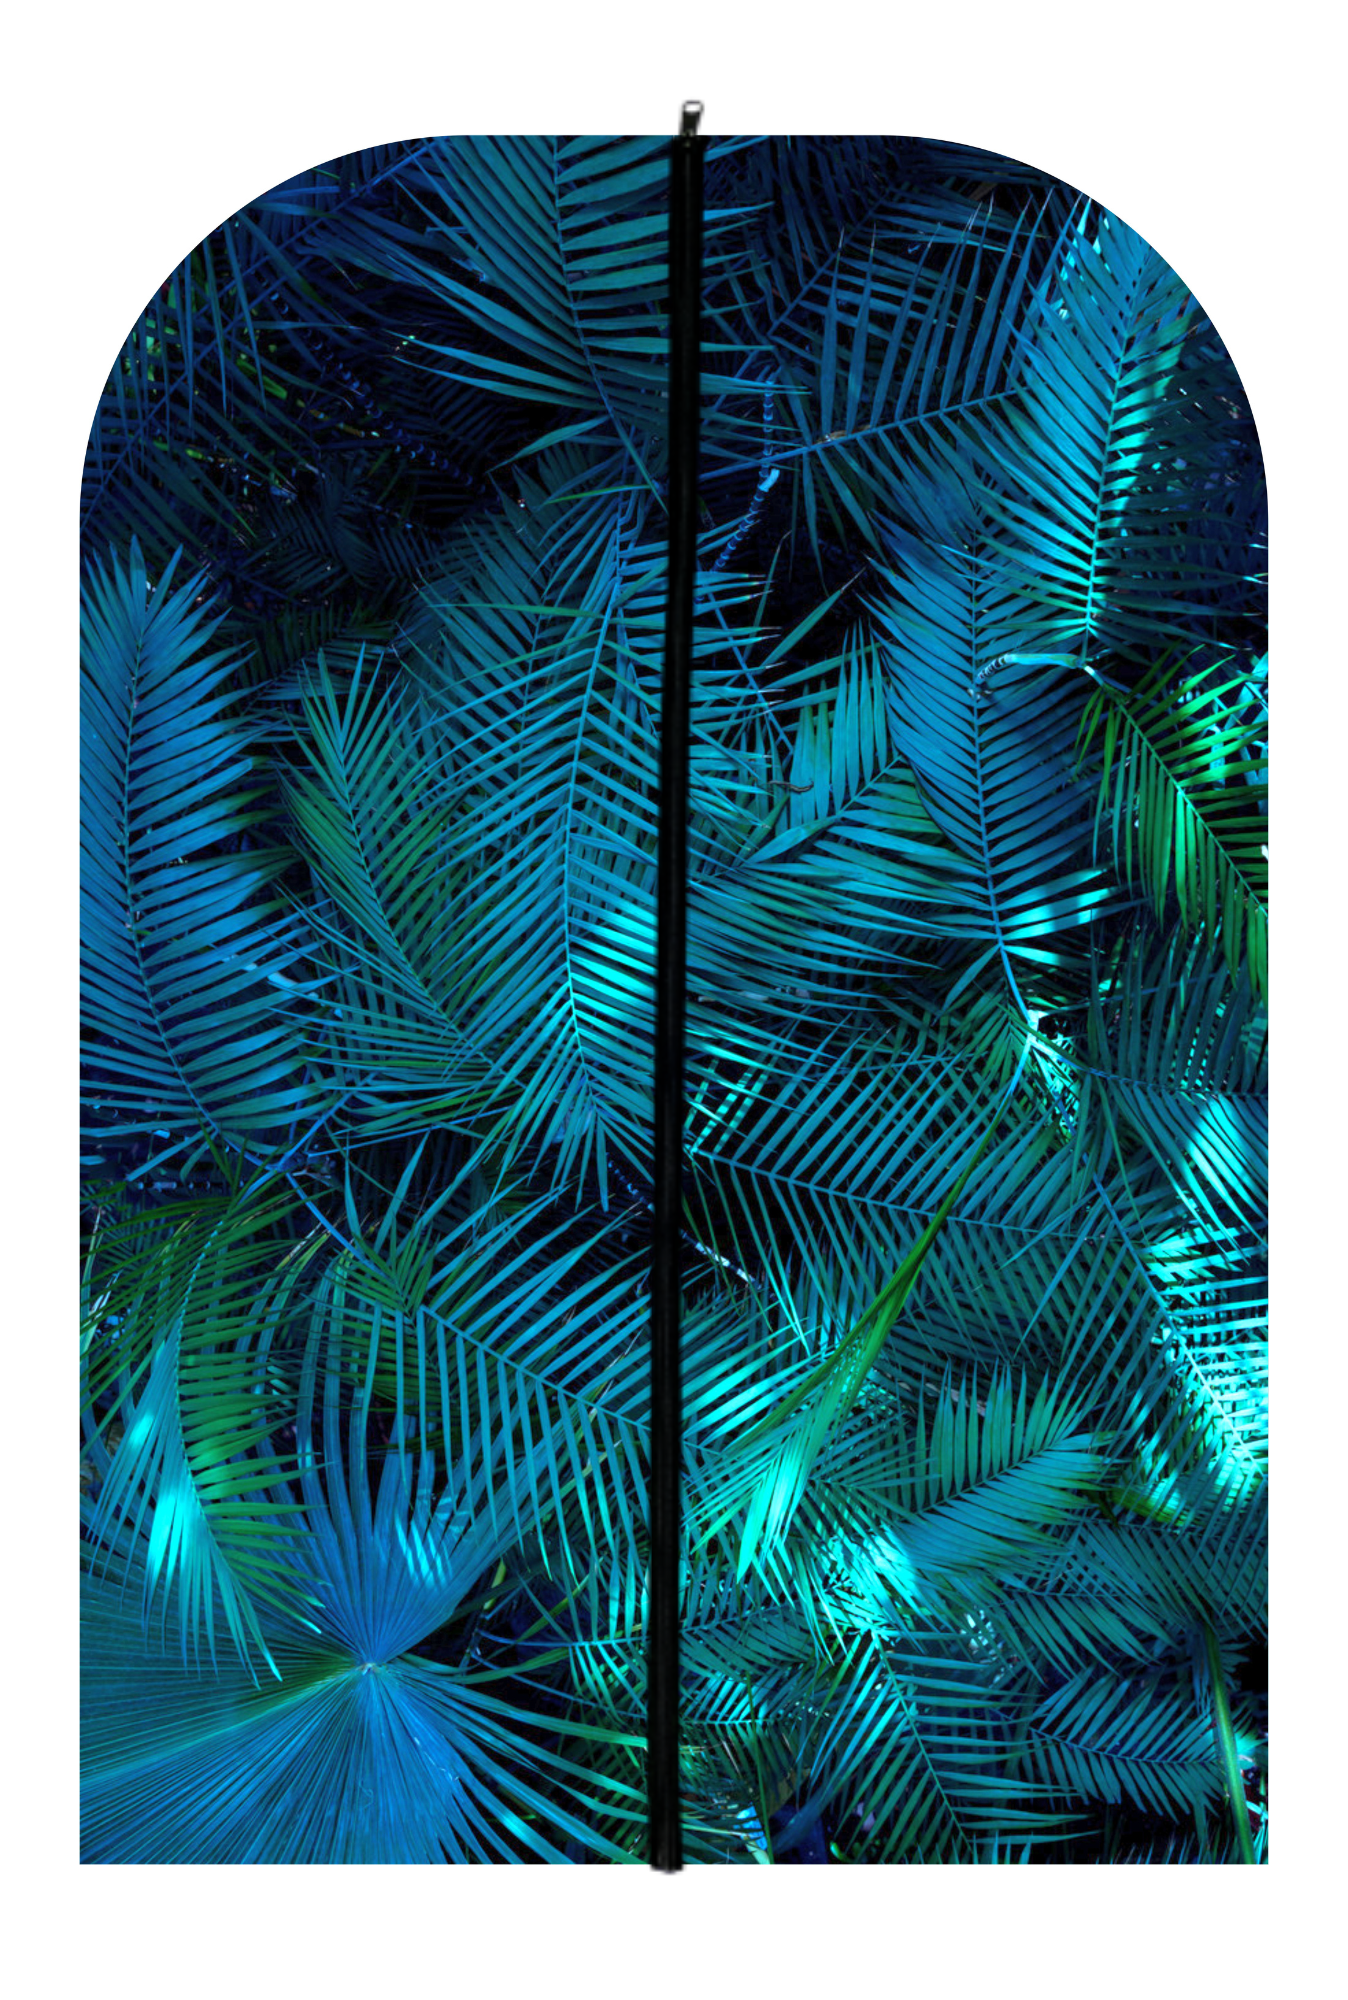 TROPICAL COVER 